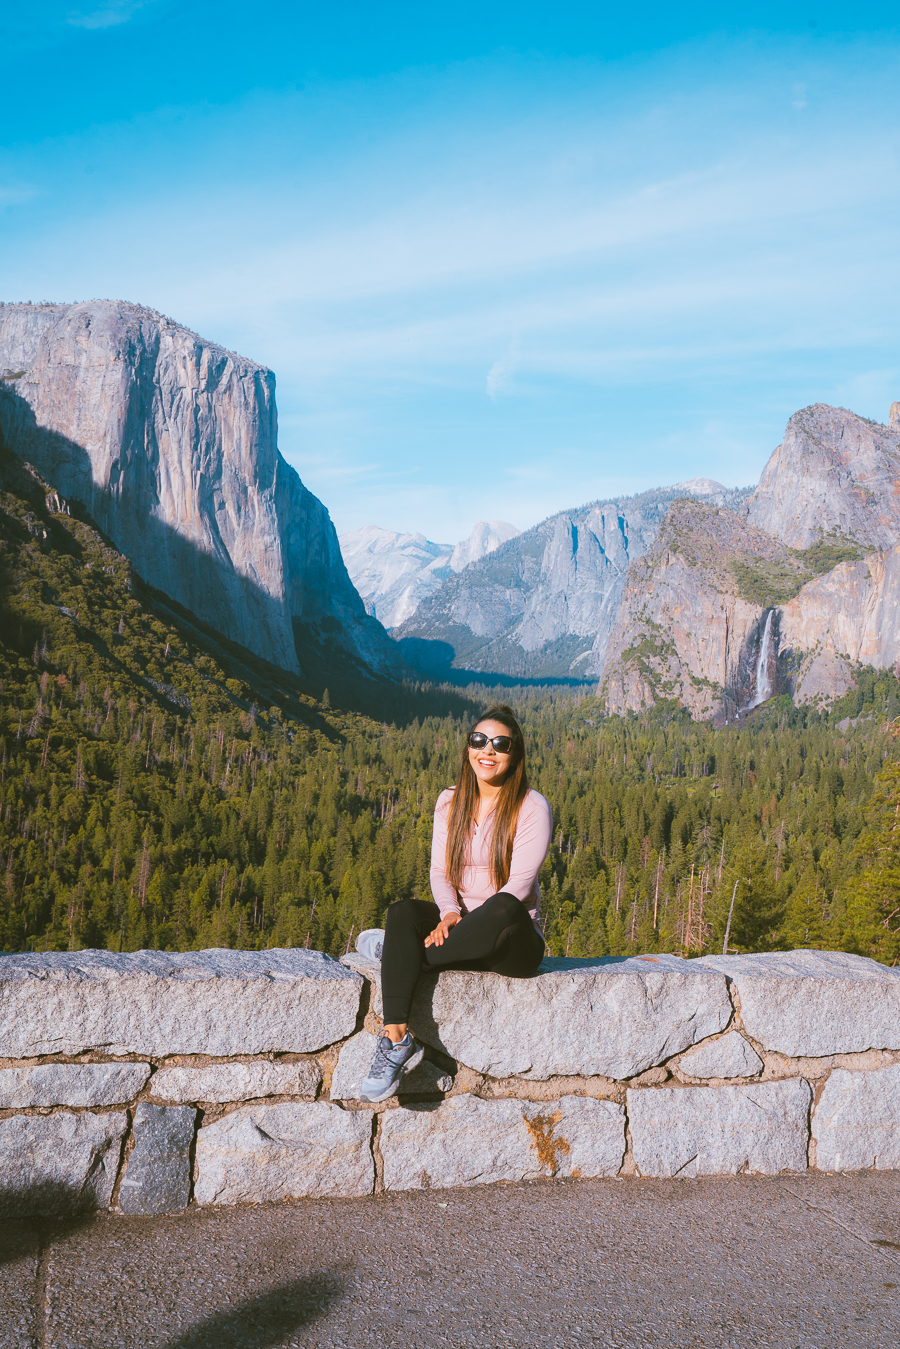 Best Hikes in Yosemite National Park